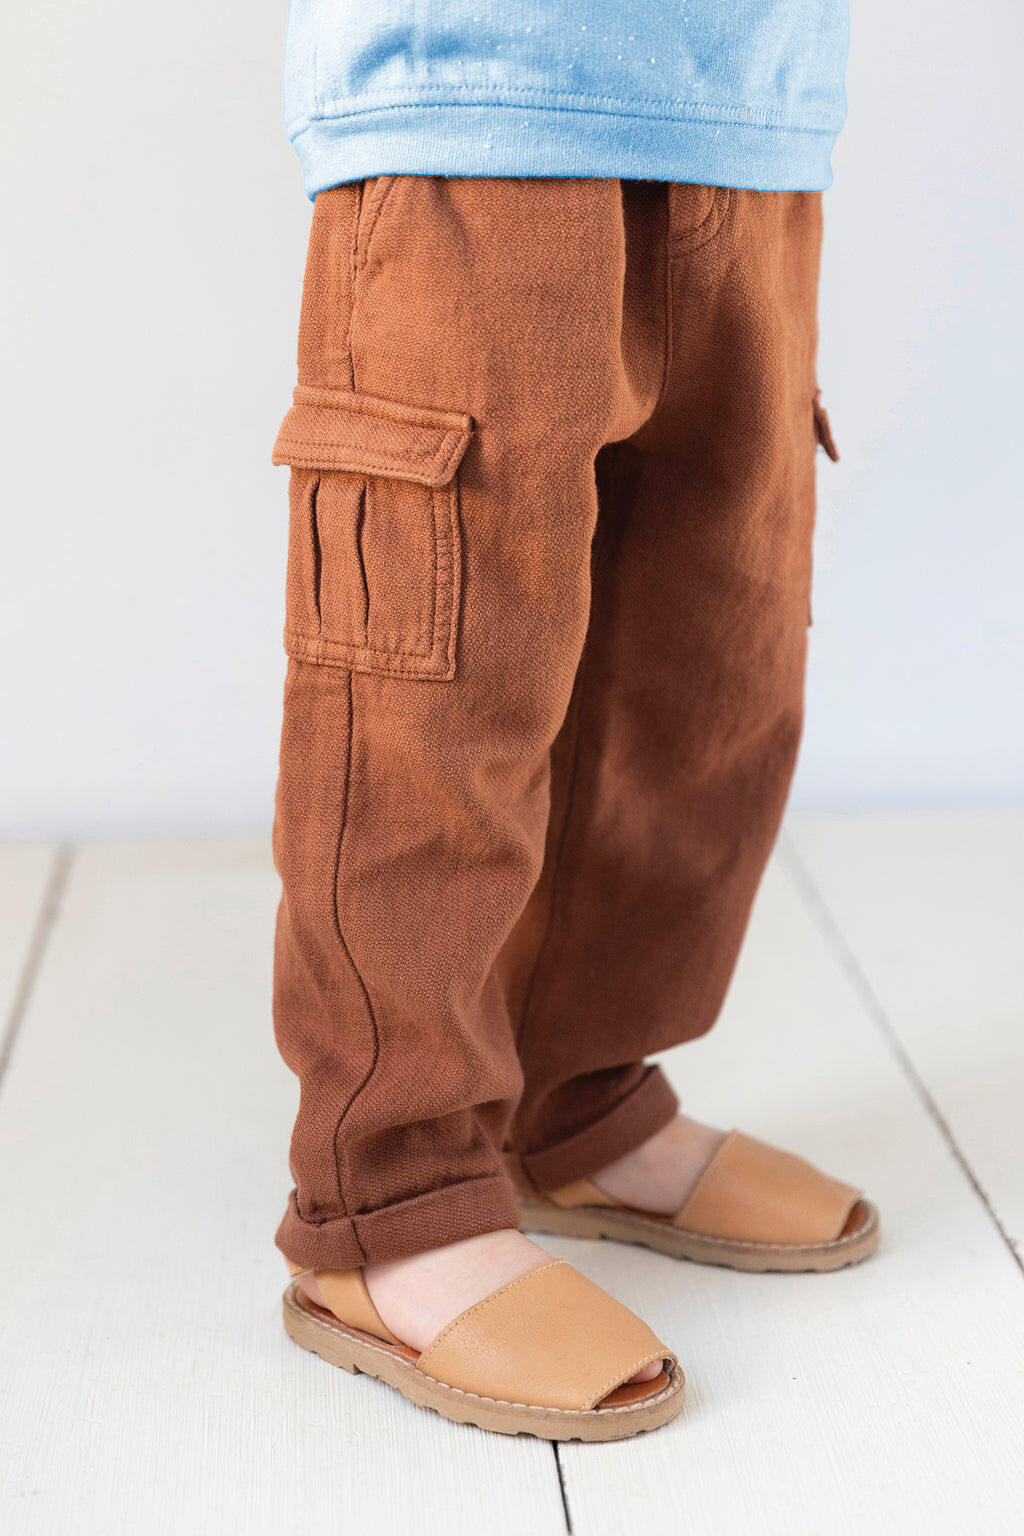 Trousers - Brown Cargo Linen